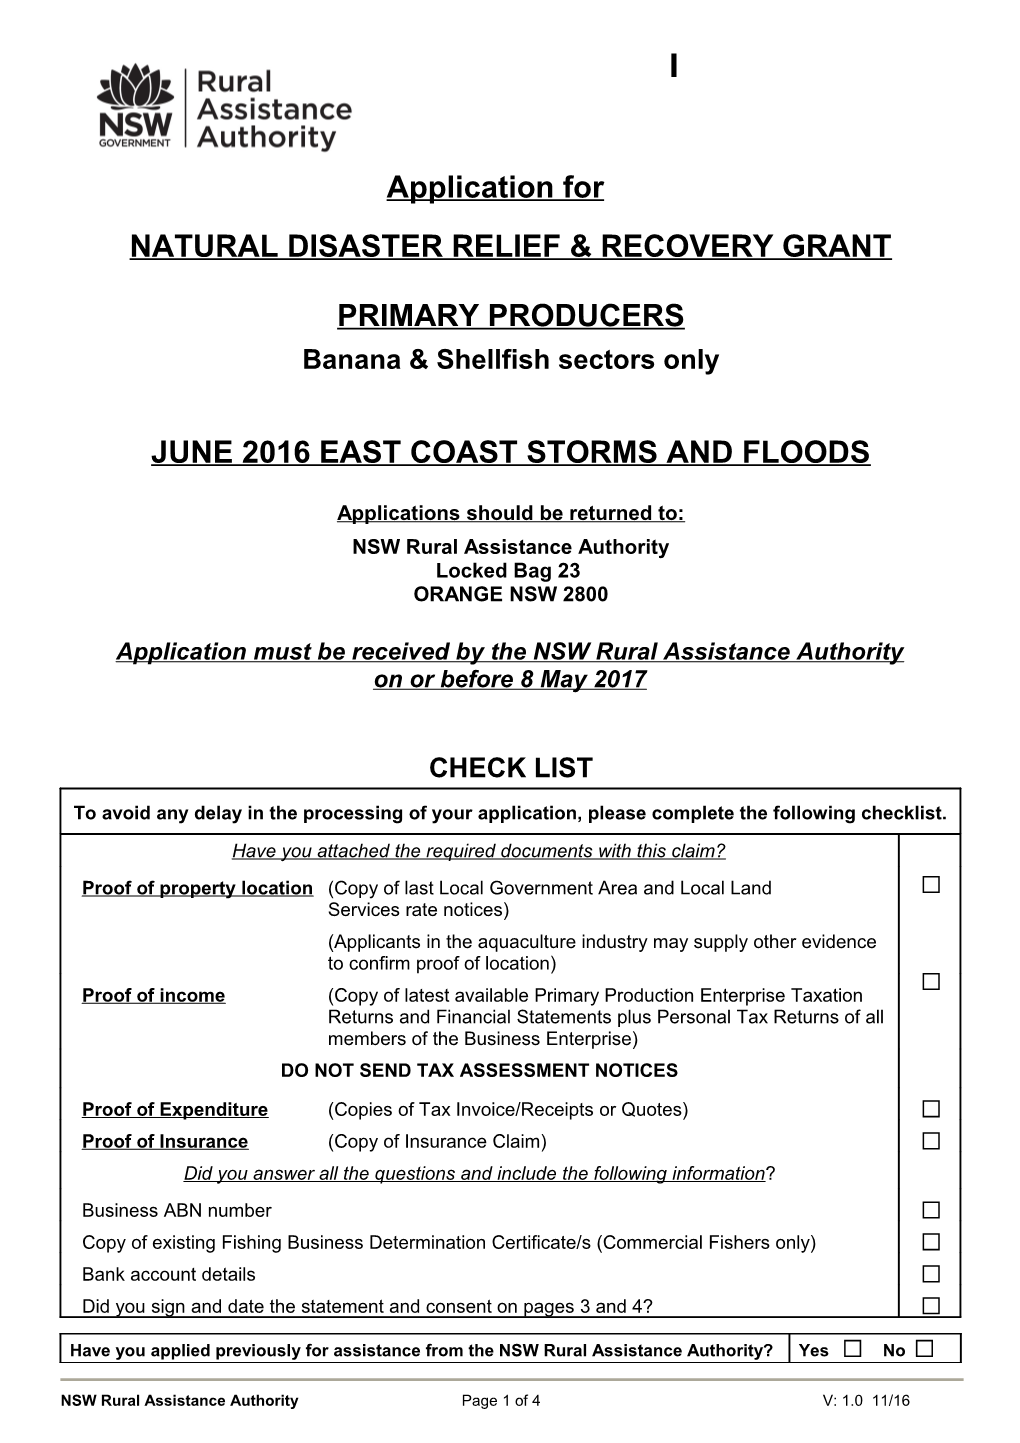 Natural Disaster Relief & Recovery Grant